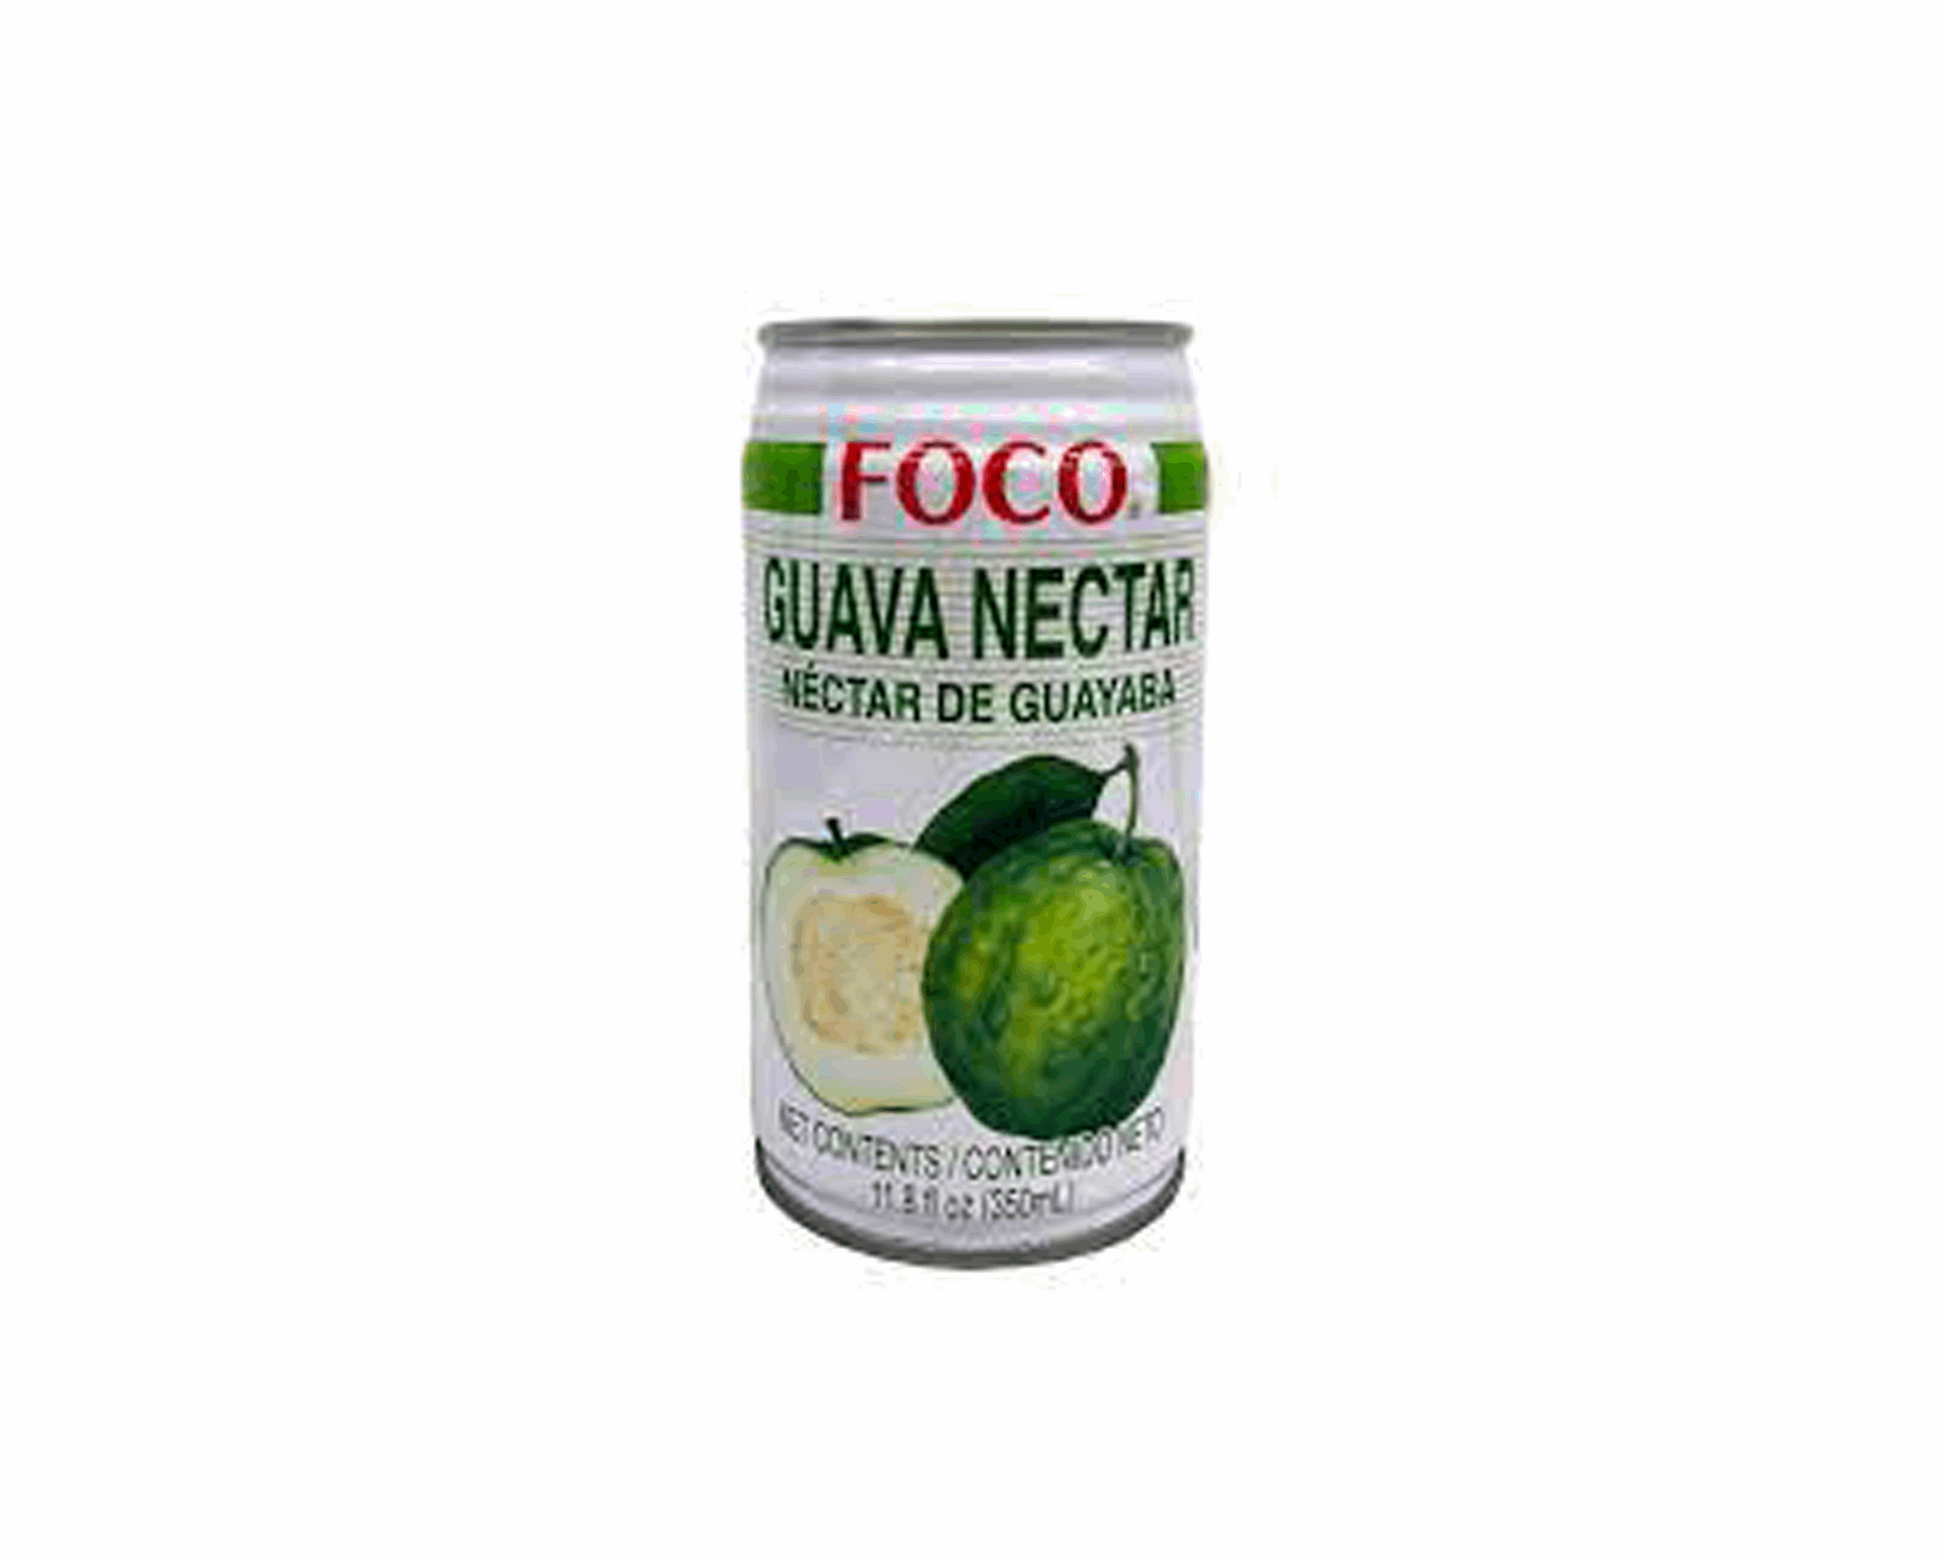 Foco Guava Nectar 350ml - Indian Spices